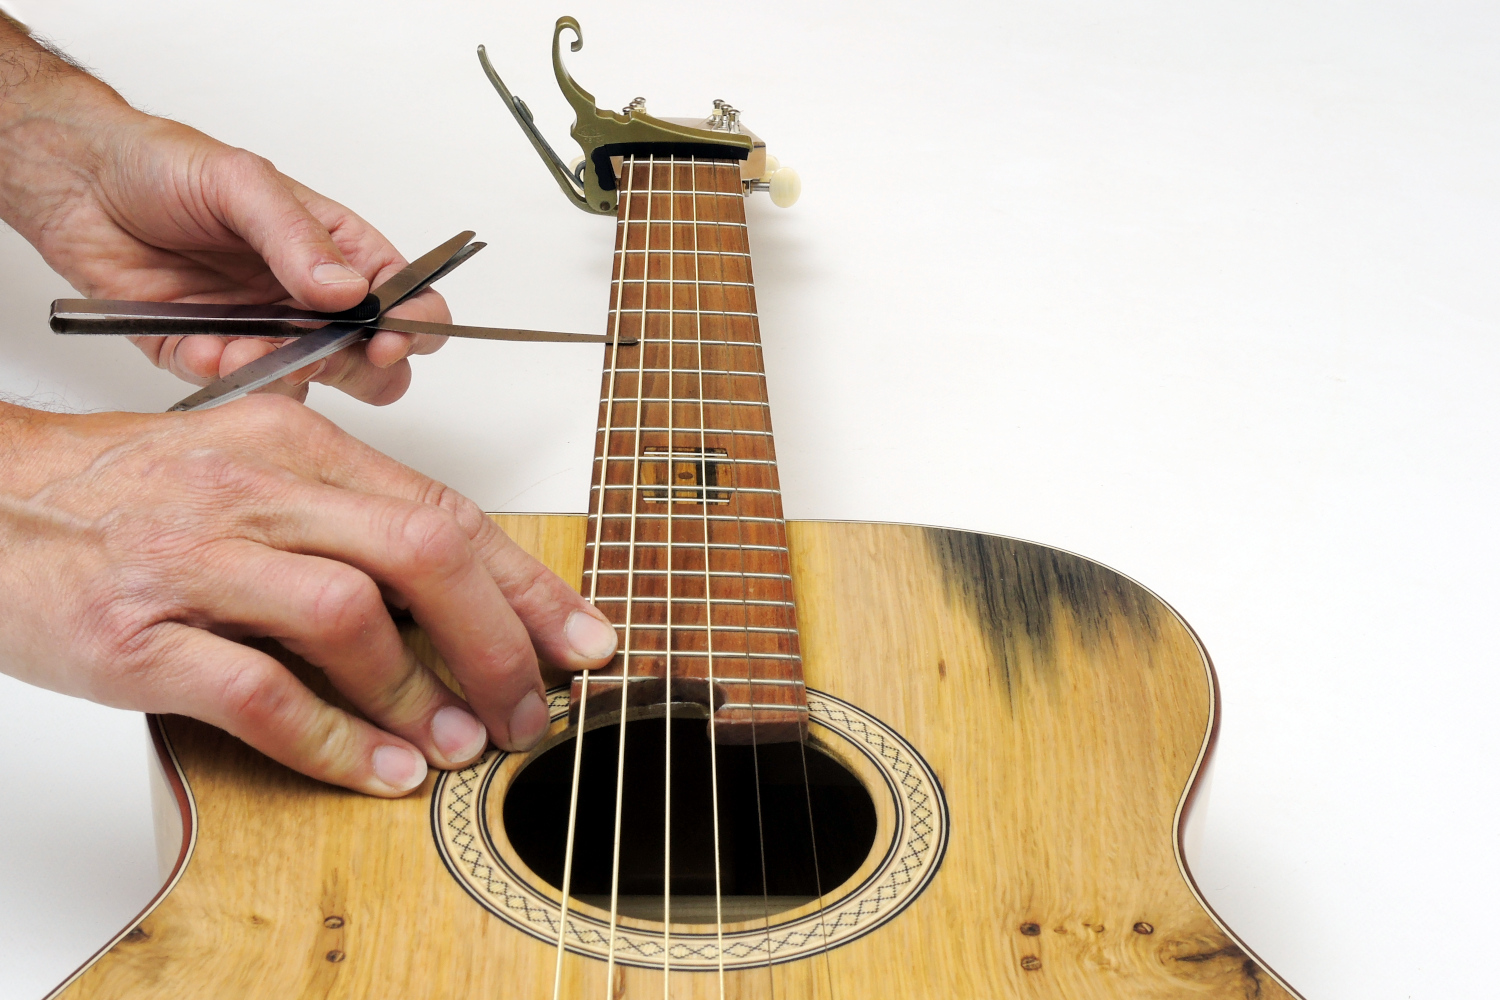 How To Adjust Action On Acoustic Guitar